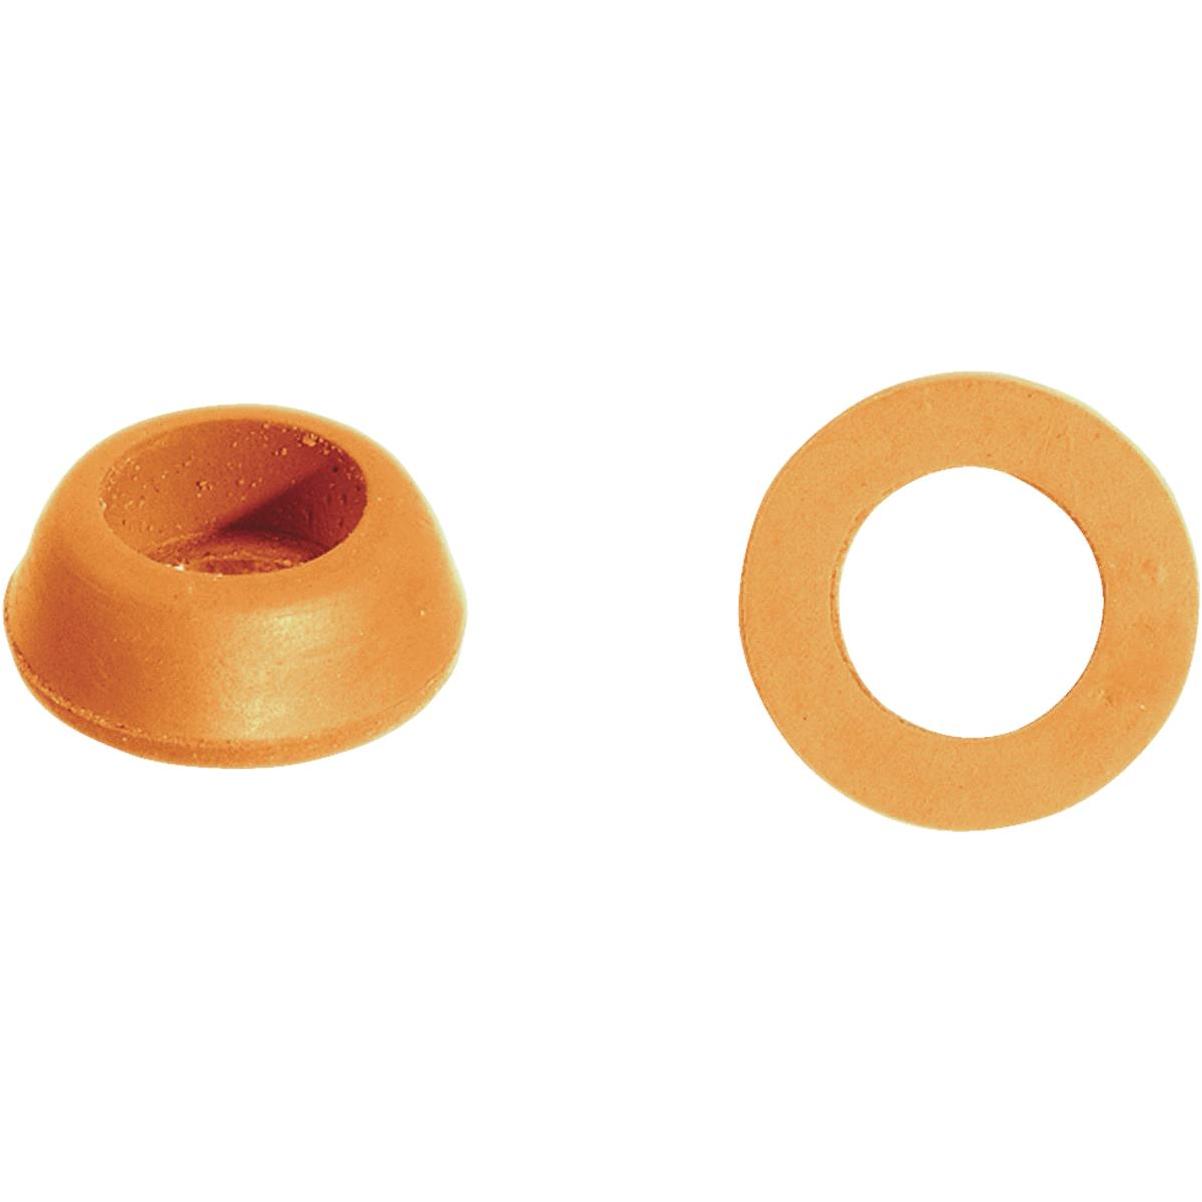 Danco Slip Joint Washer 23/32  Od For 3/8  Od Tubing Rubber Polybag X 11/32  Id.